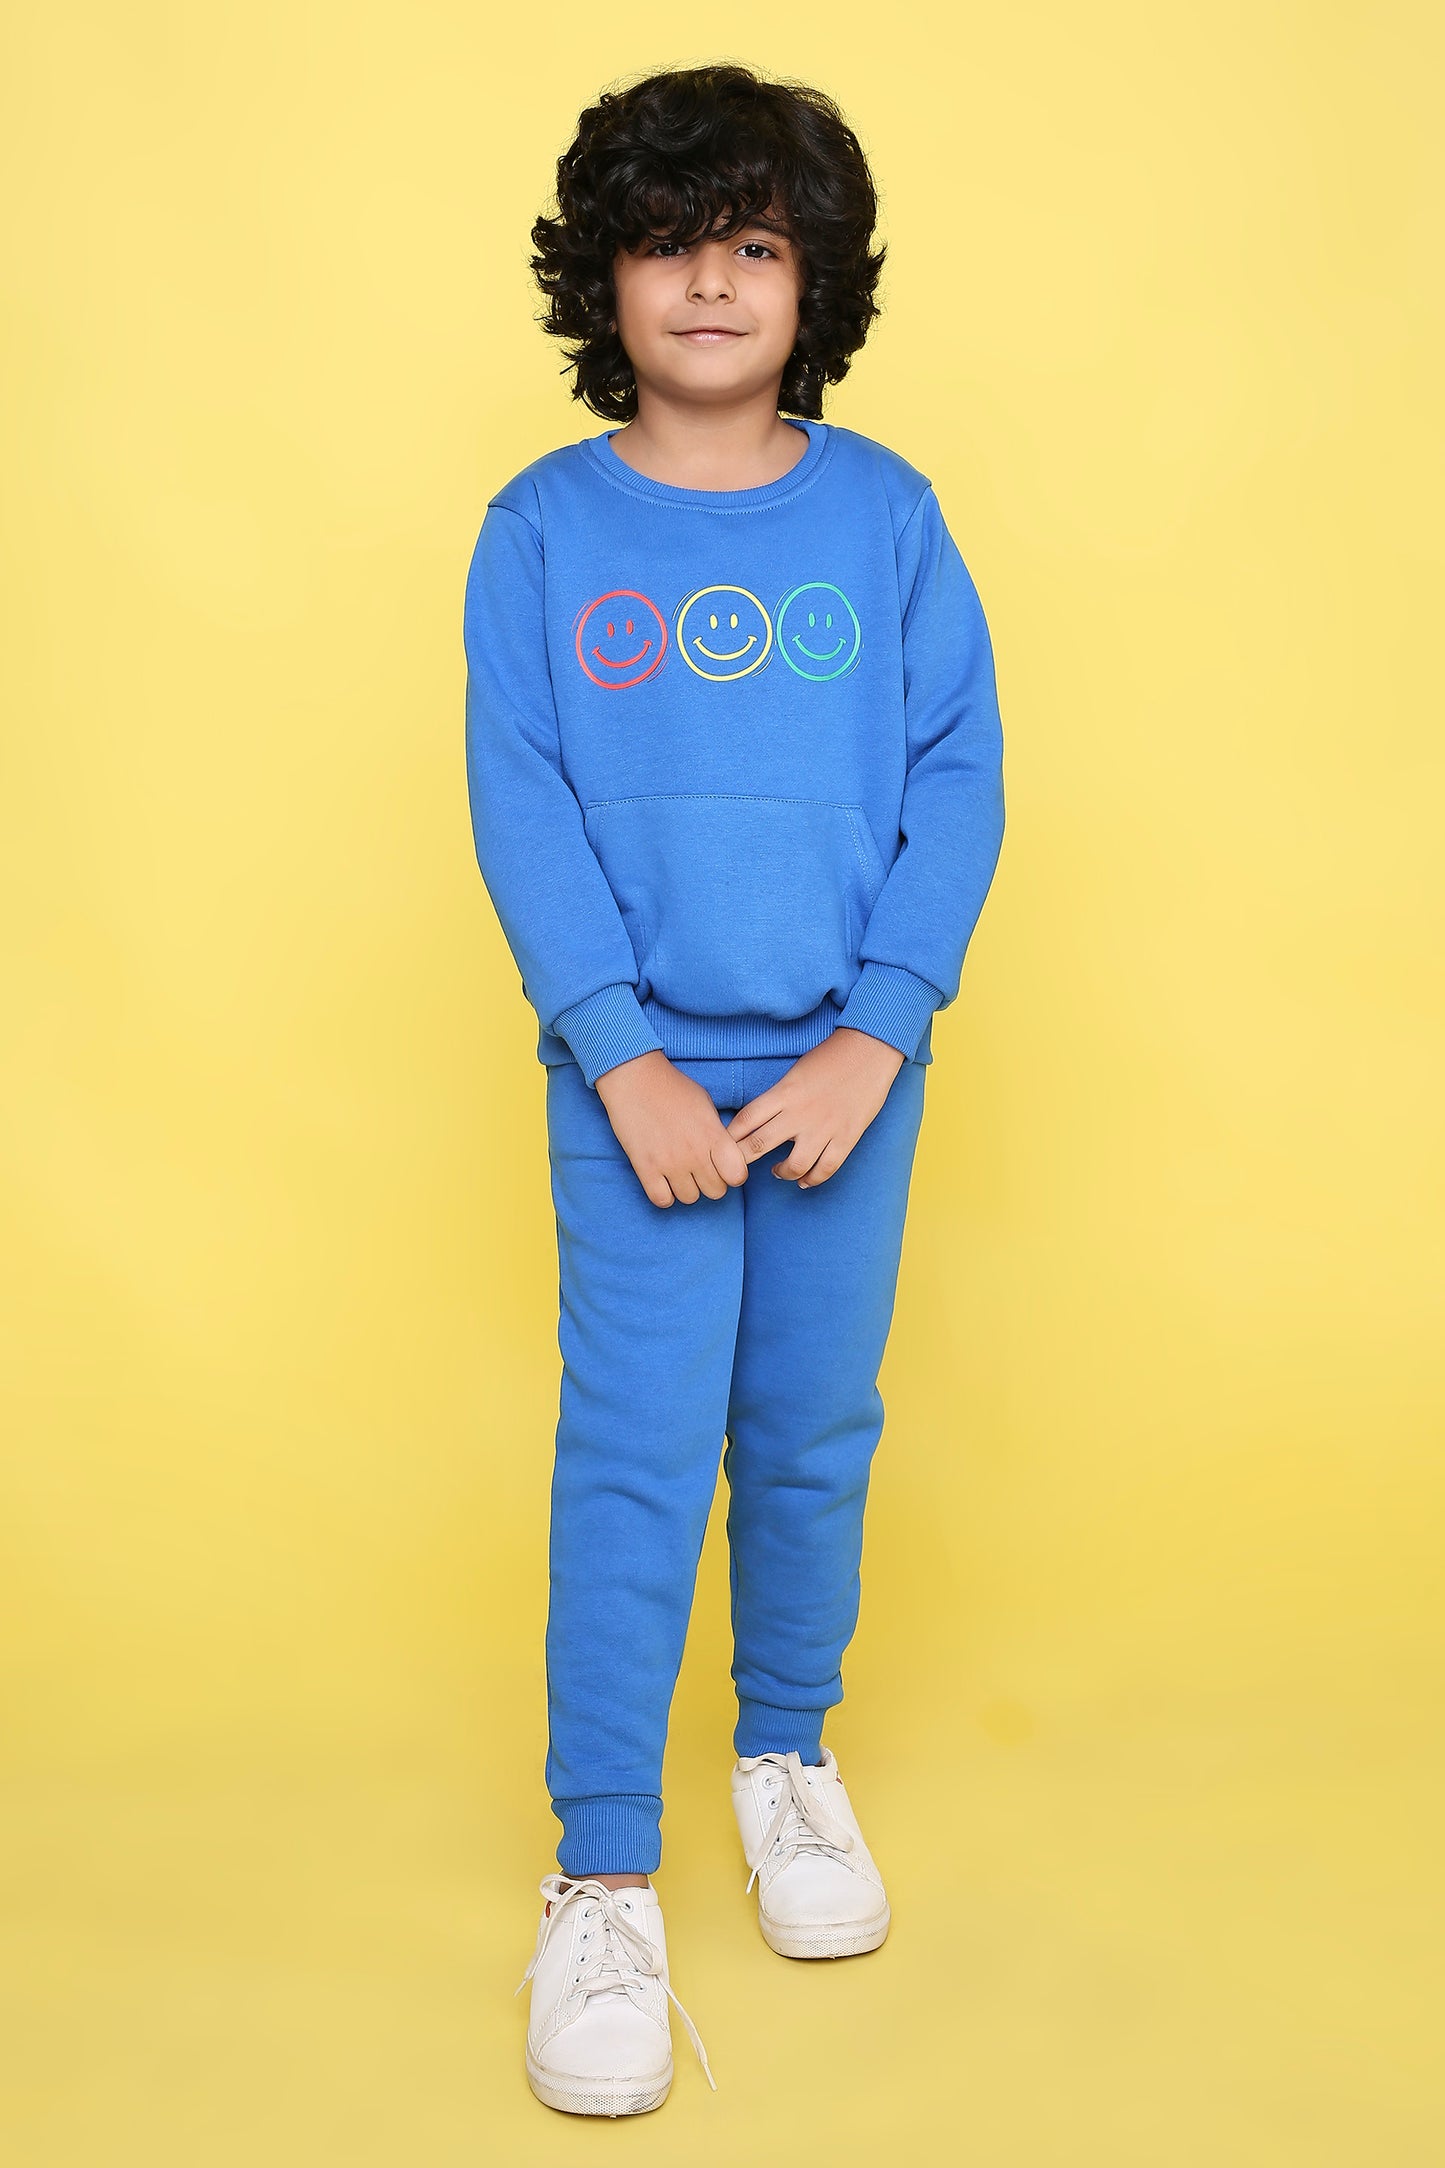 Knitting Doodles Kids' Jogger Set with Warm Fleece and Smart Smiley faces Print- Blue